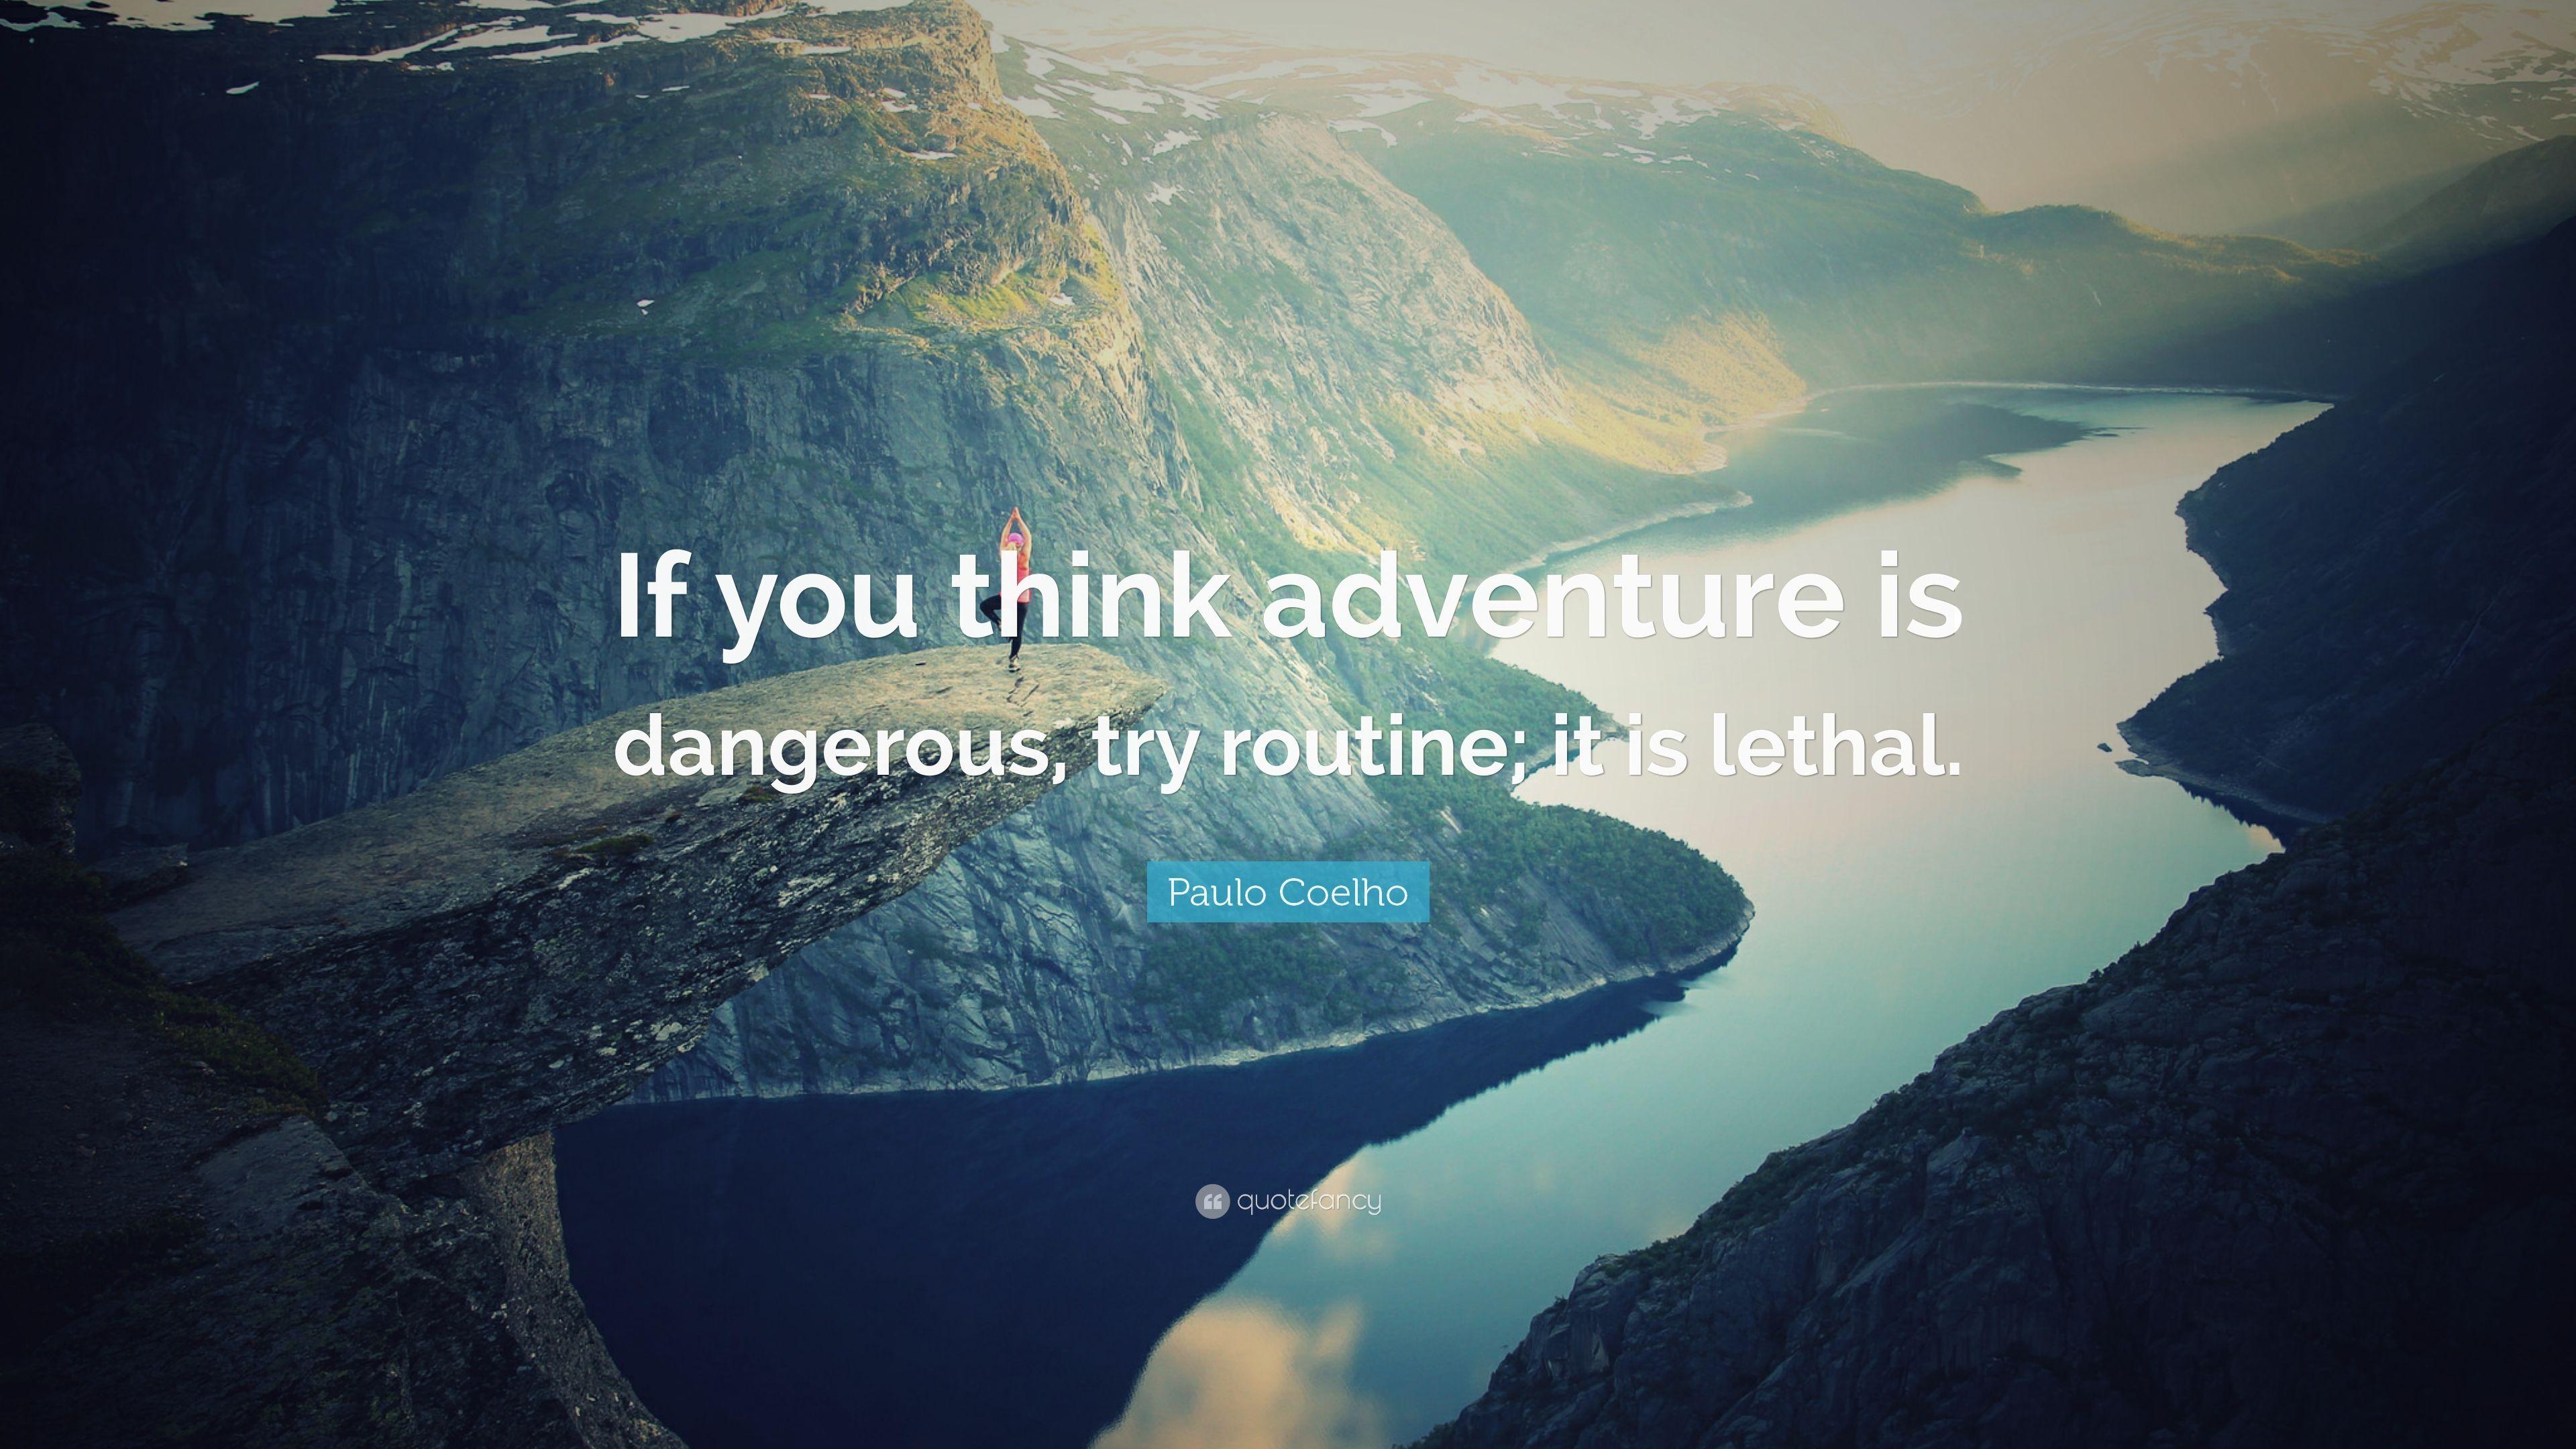 Paulo Coelho Quote: “If you think adventure is dangerous, try